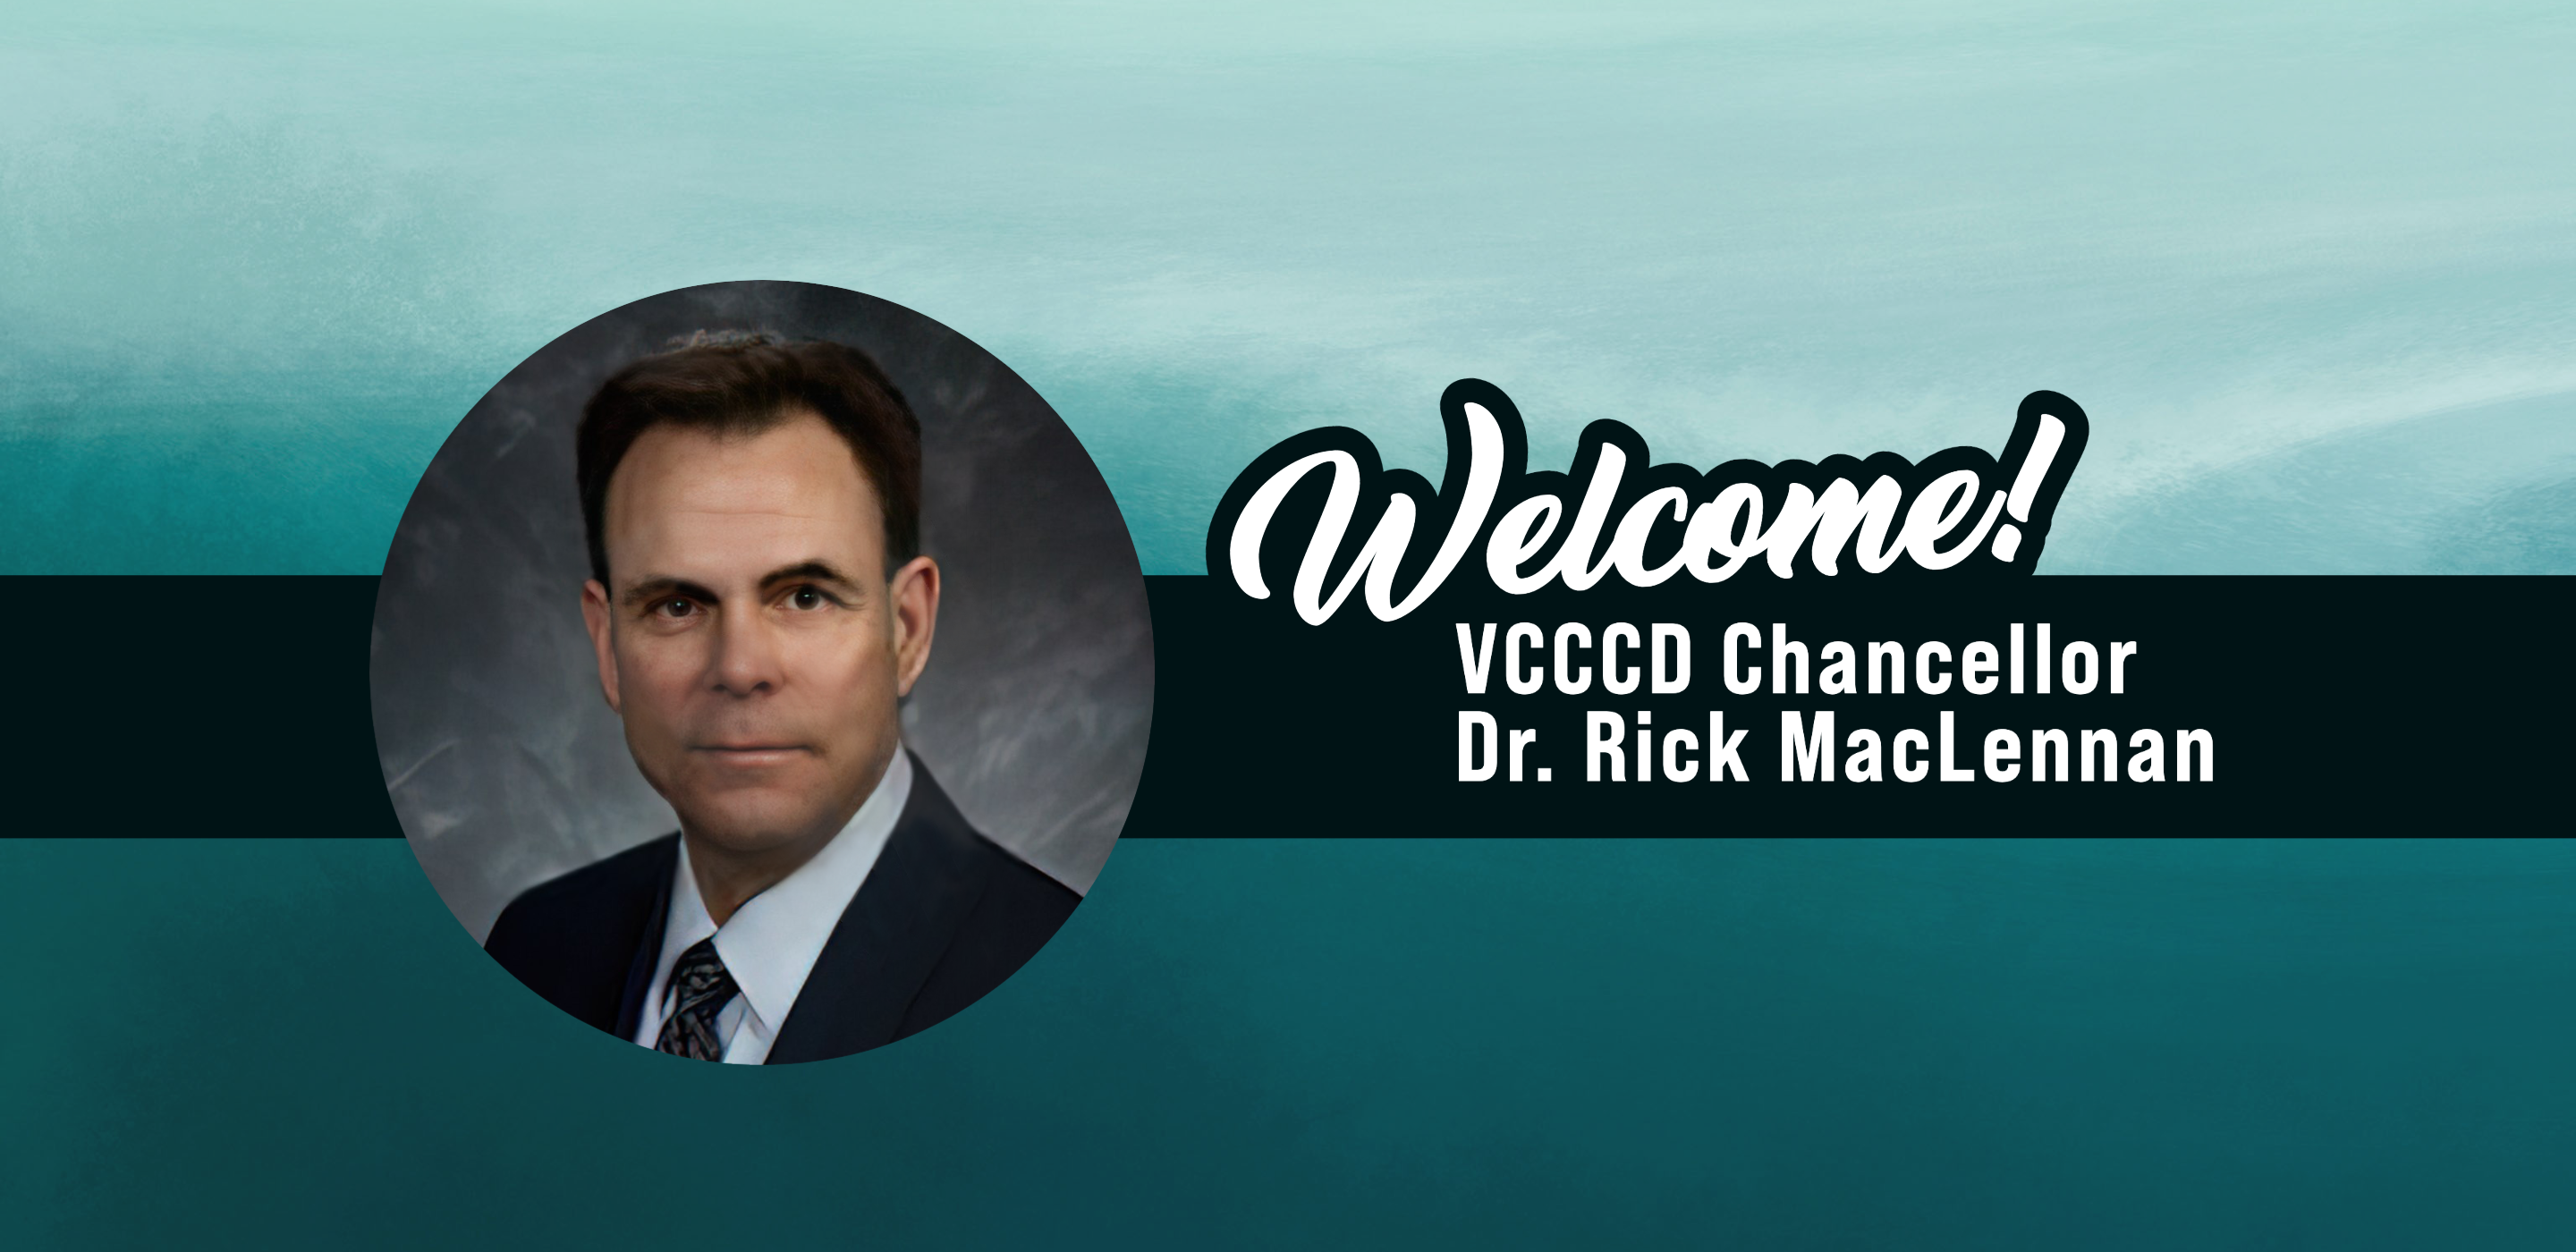 Welcome! VCCCD Chancellor Dr. Rick MacLenan